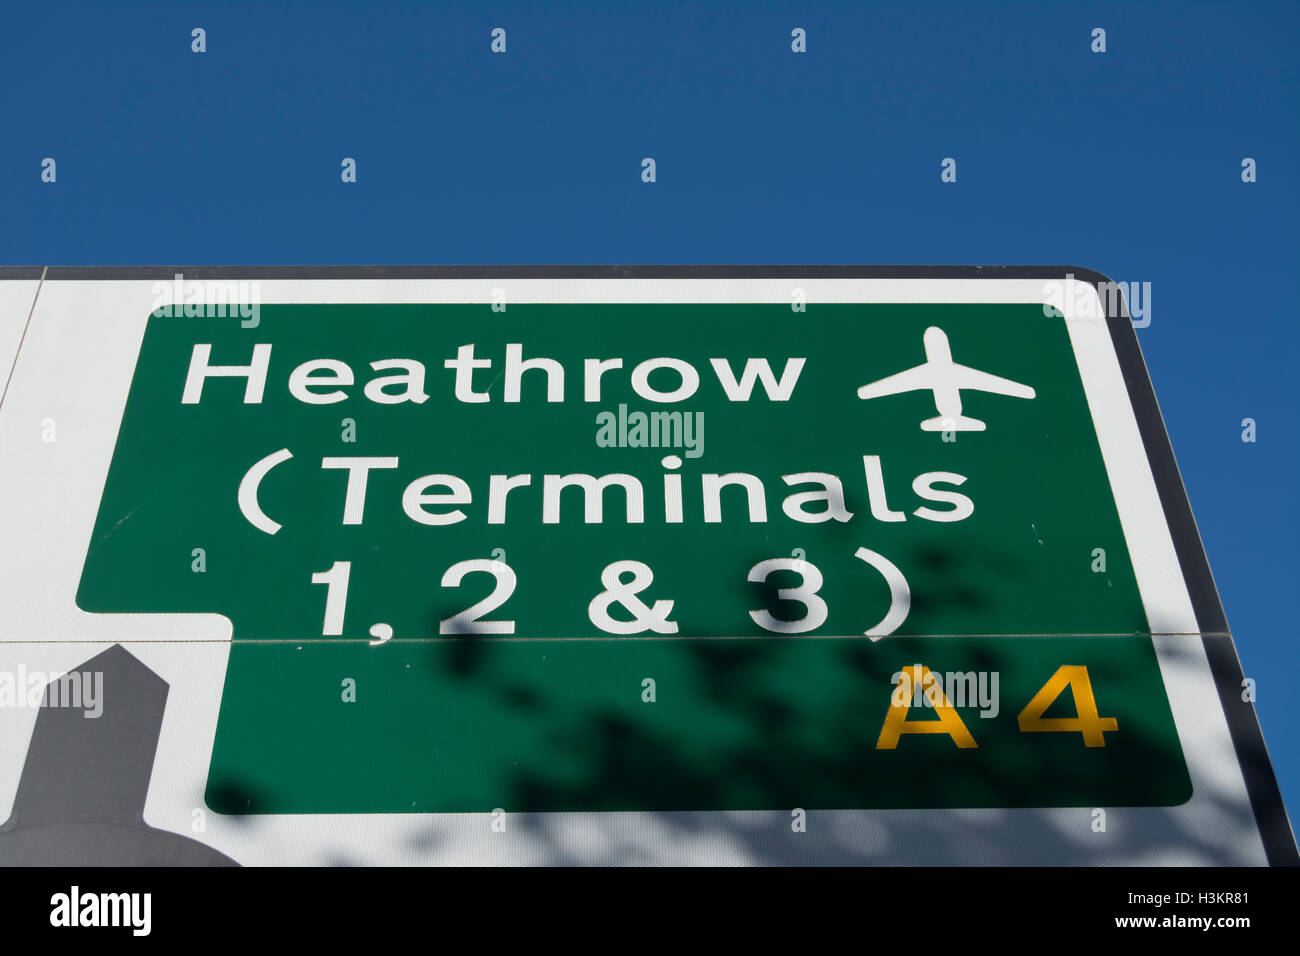 british road sign showing direction to heathrow airport terminals 1,2 and 3, in hounslow, middlesex, england Stock Photo